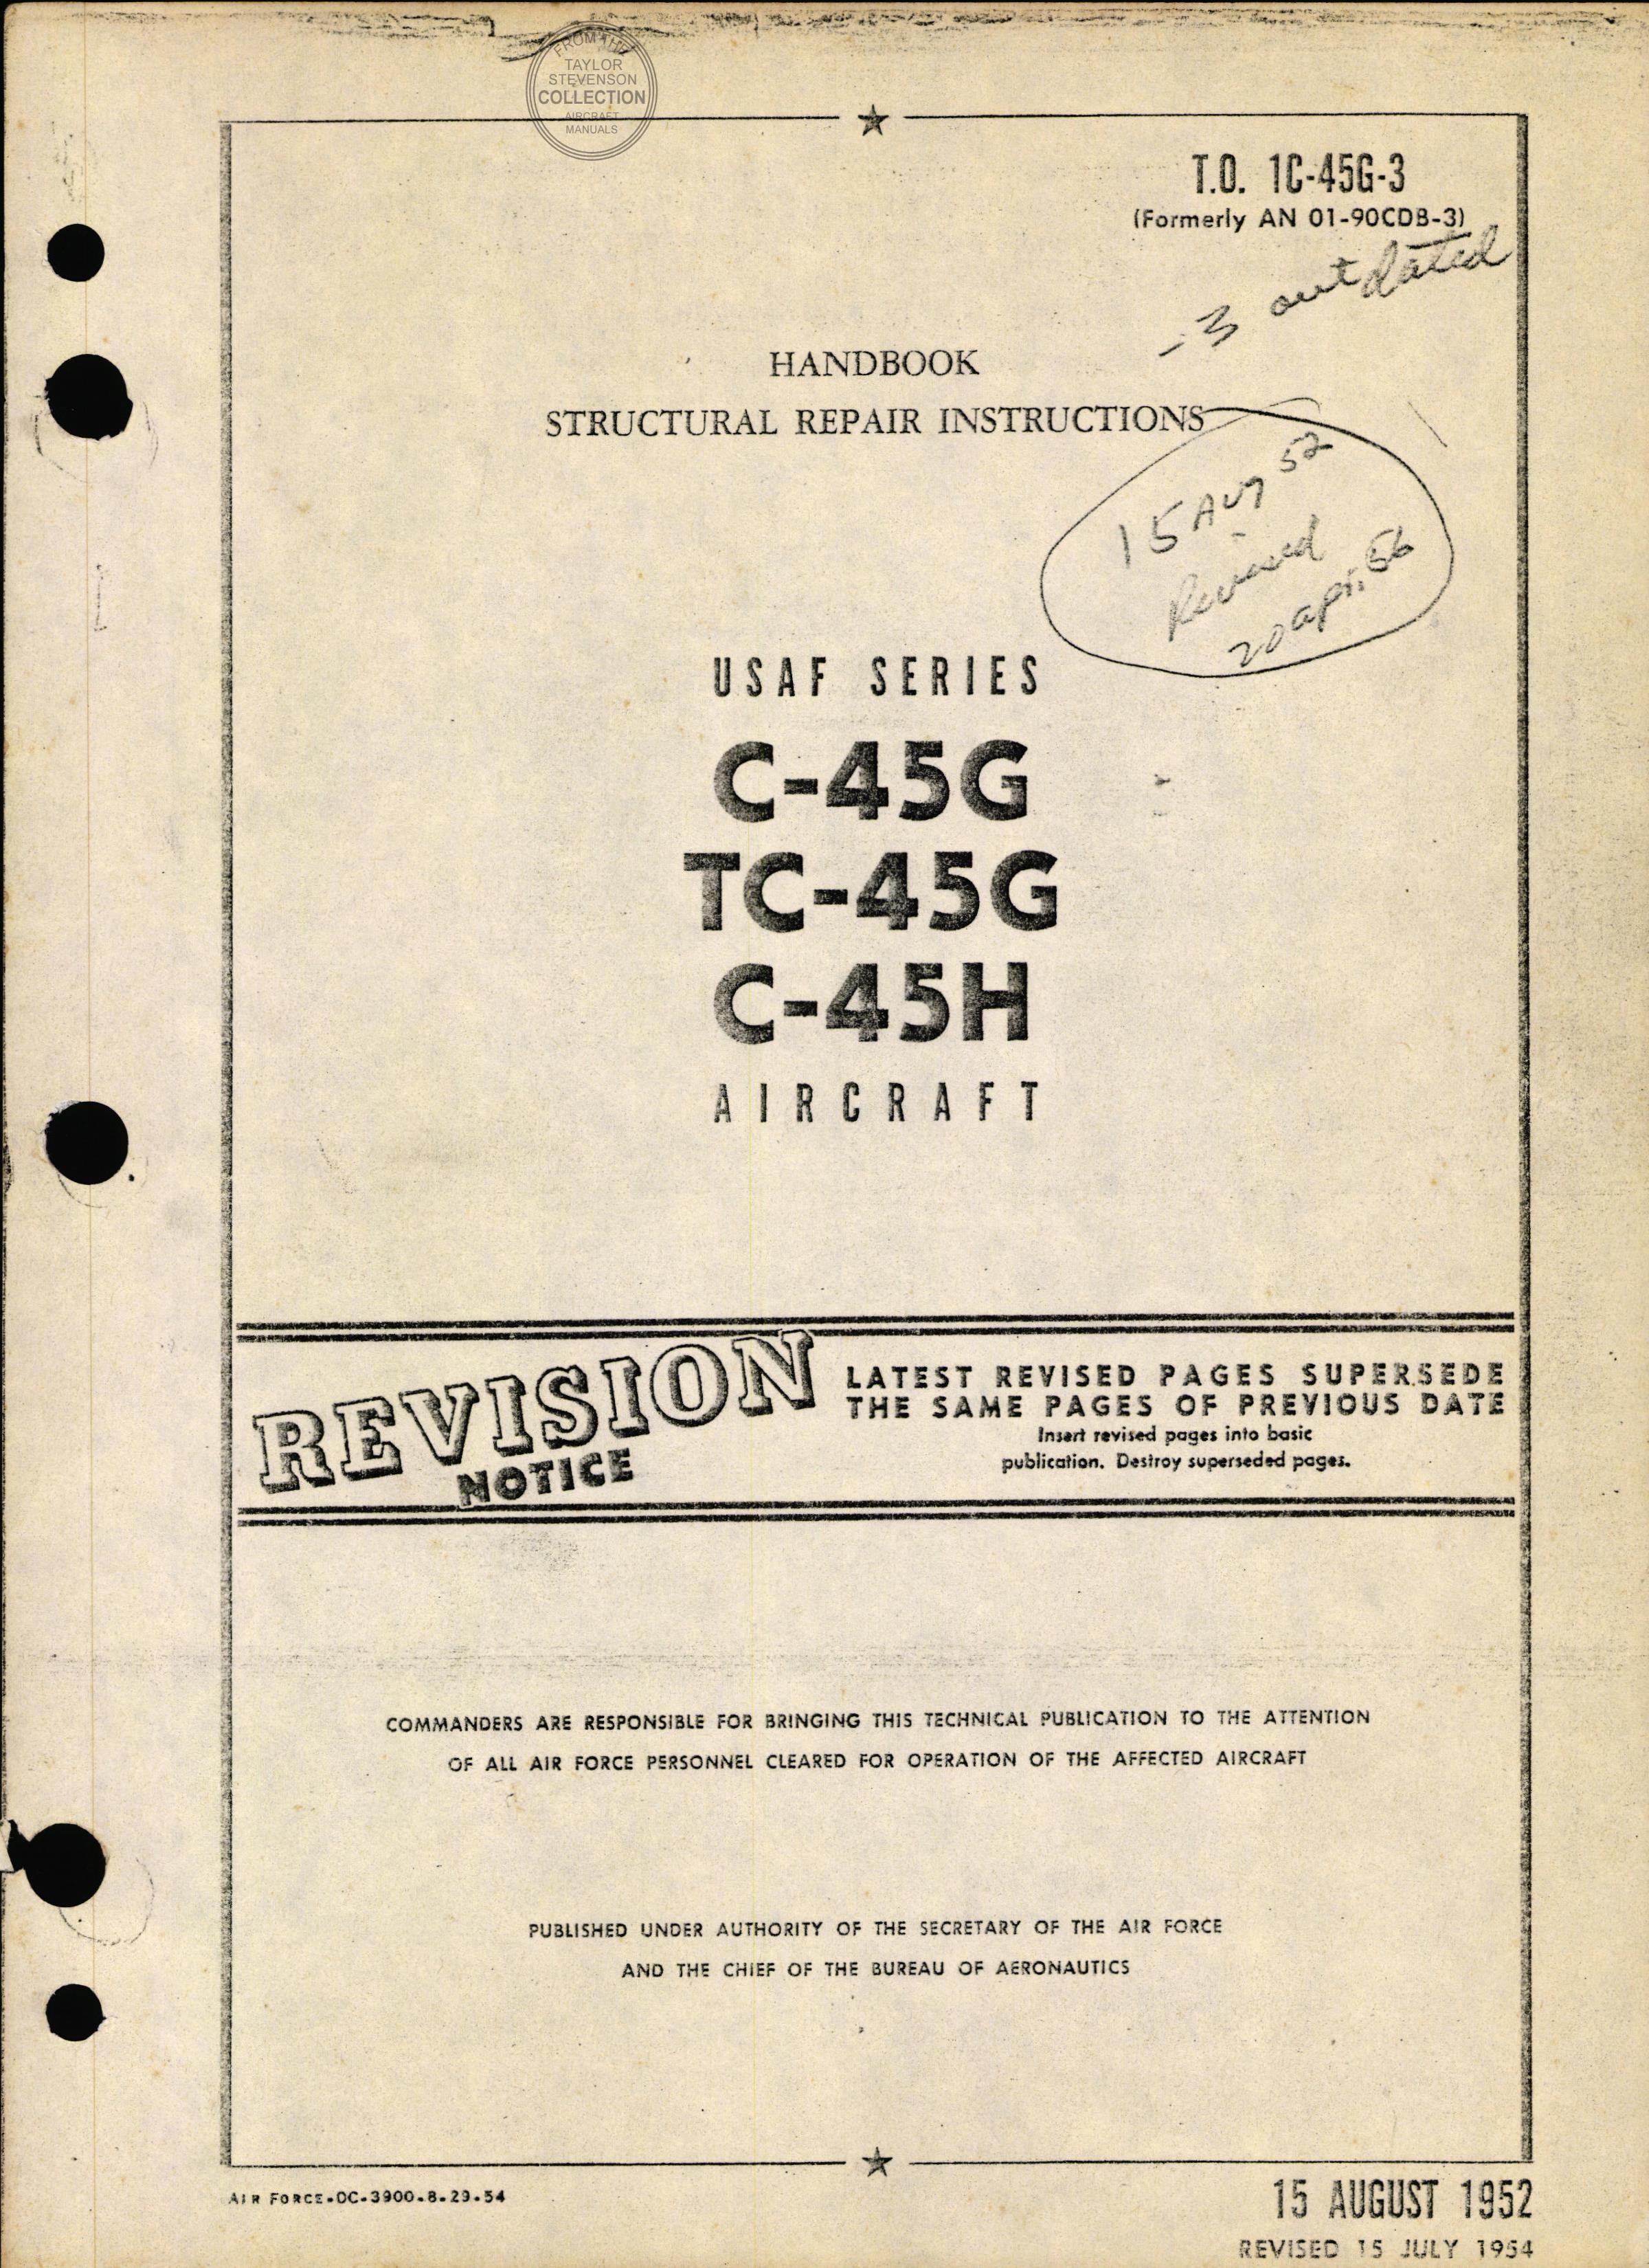 Sample page 1 from AirCorps Library document: Structural Repair Instructions - C-45G - C-45H